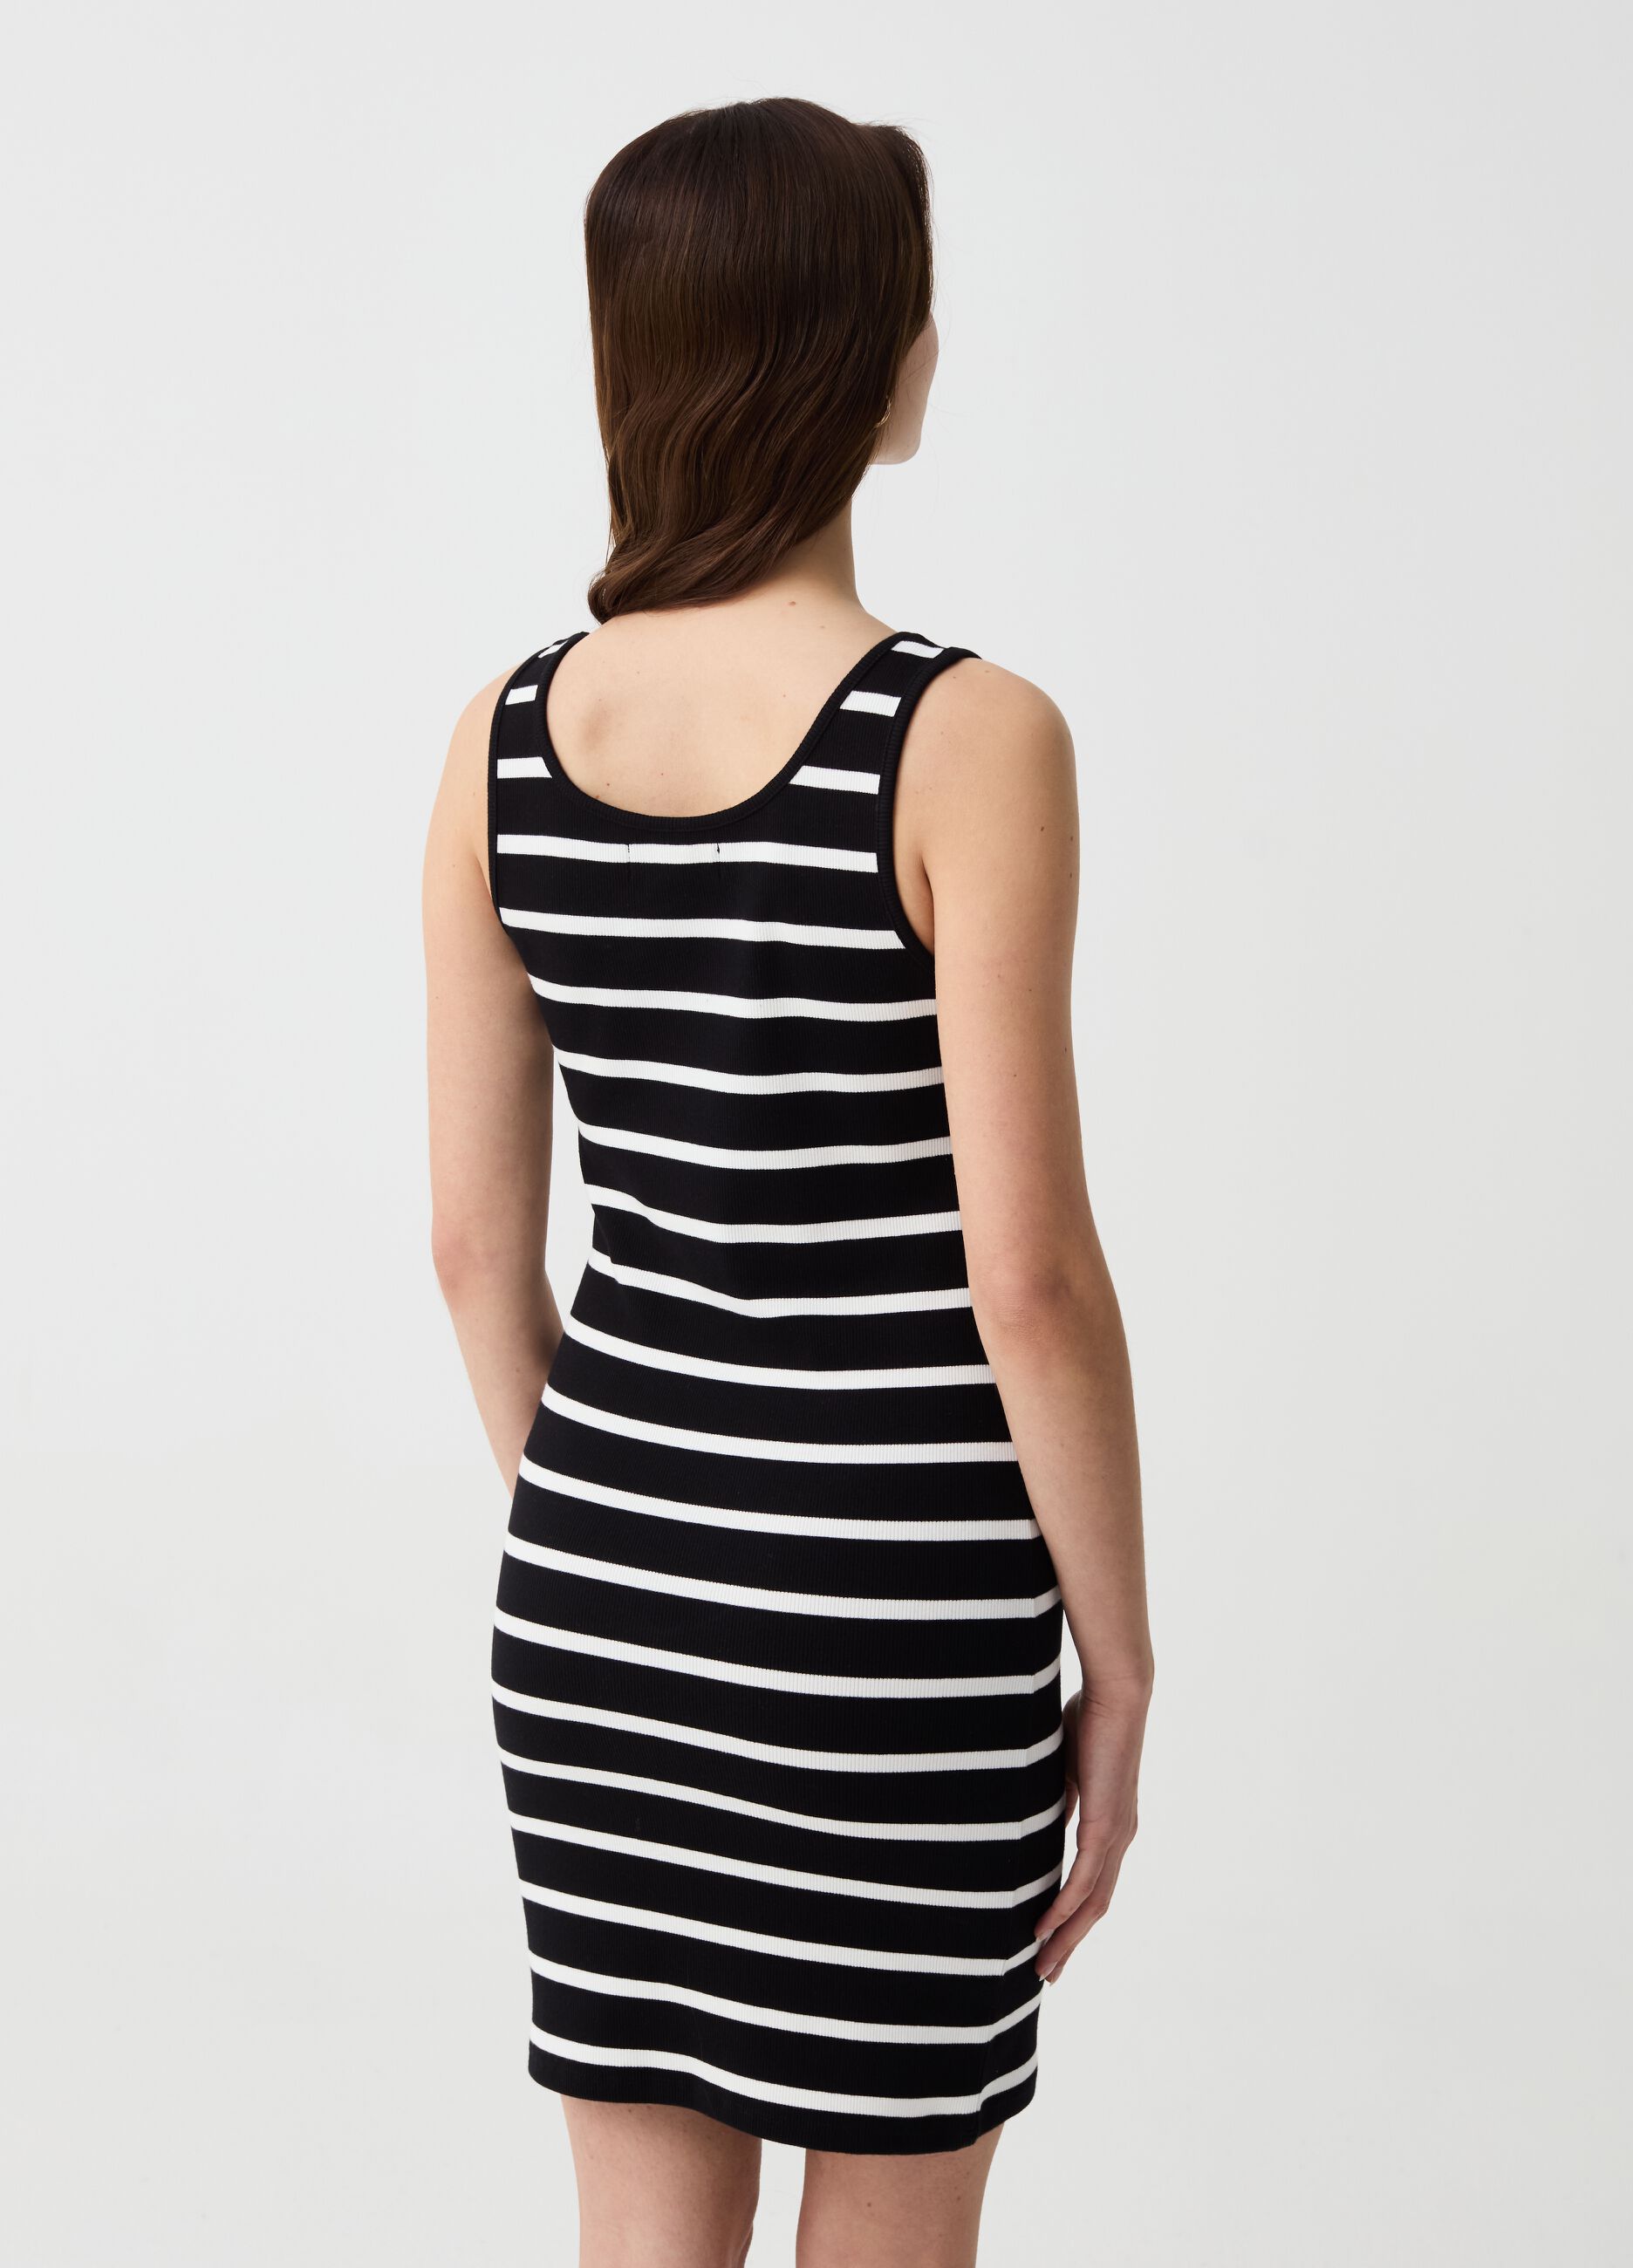 Essential short sleeveless dress with stripes